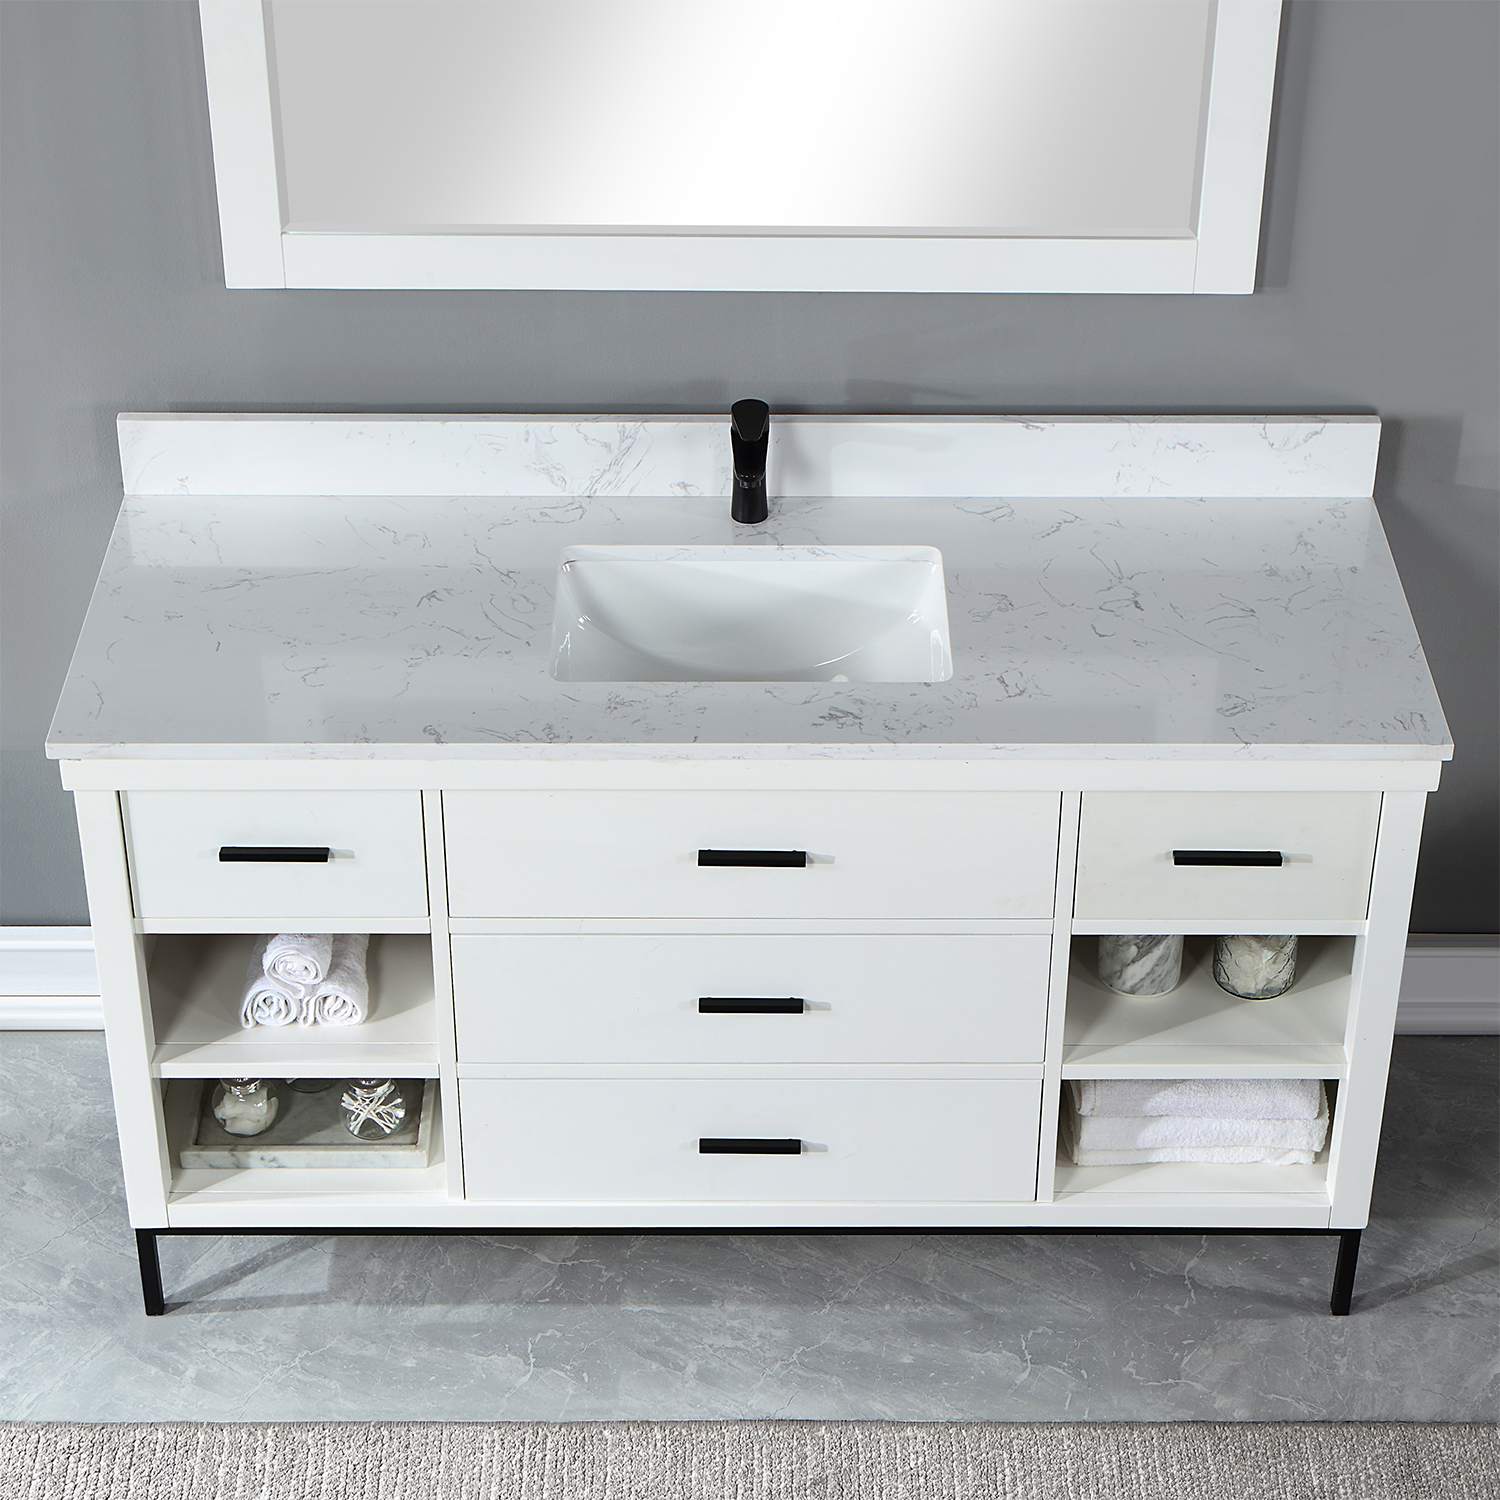 Issac Edwards Collection 60" Single Bathroom Vanity Set in White with Carrara White Composite Stone Countertop without Mirror